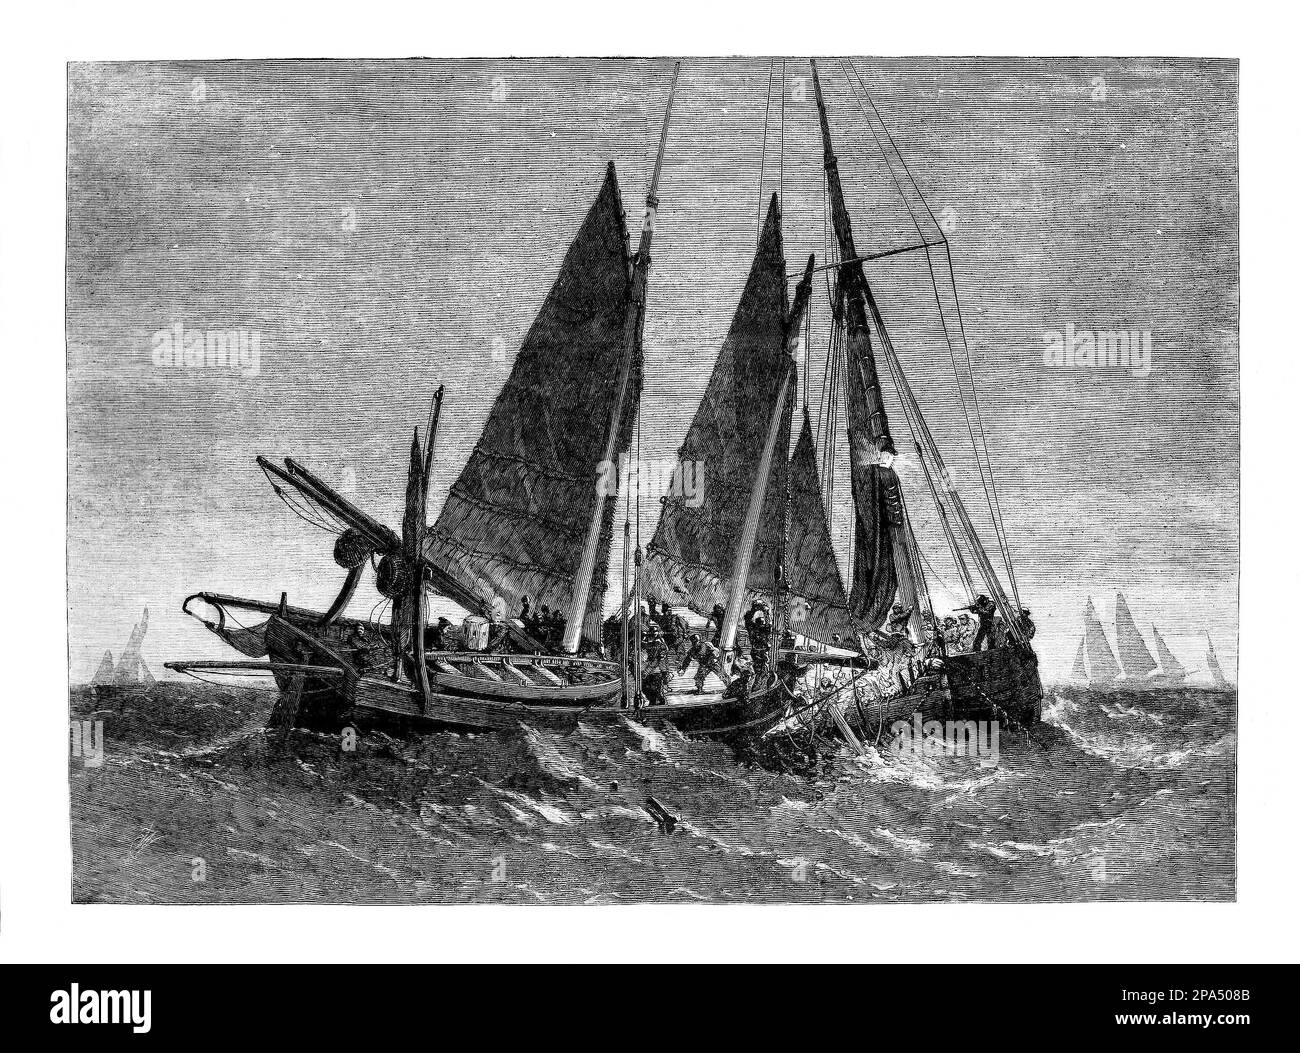 An illustration from 1861 of a fight between the Ramsgate based fishing boat 'Prince Arthur' and a Boulogne based fishing boat off North Foreland, a chalk headland on the Kent coast of southeast England. Stock Photo